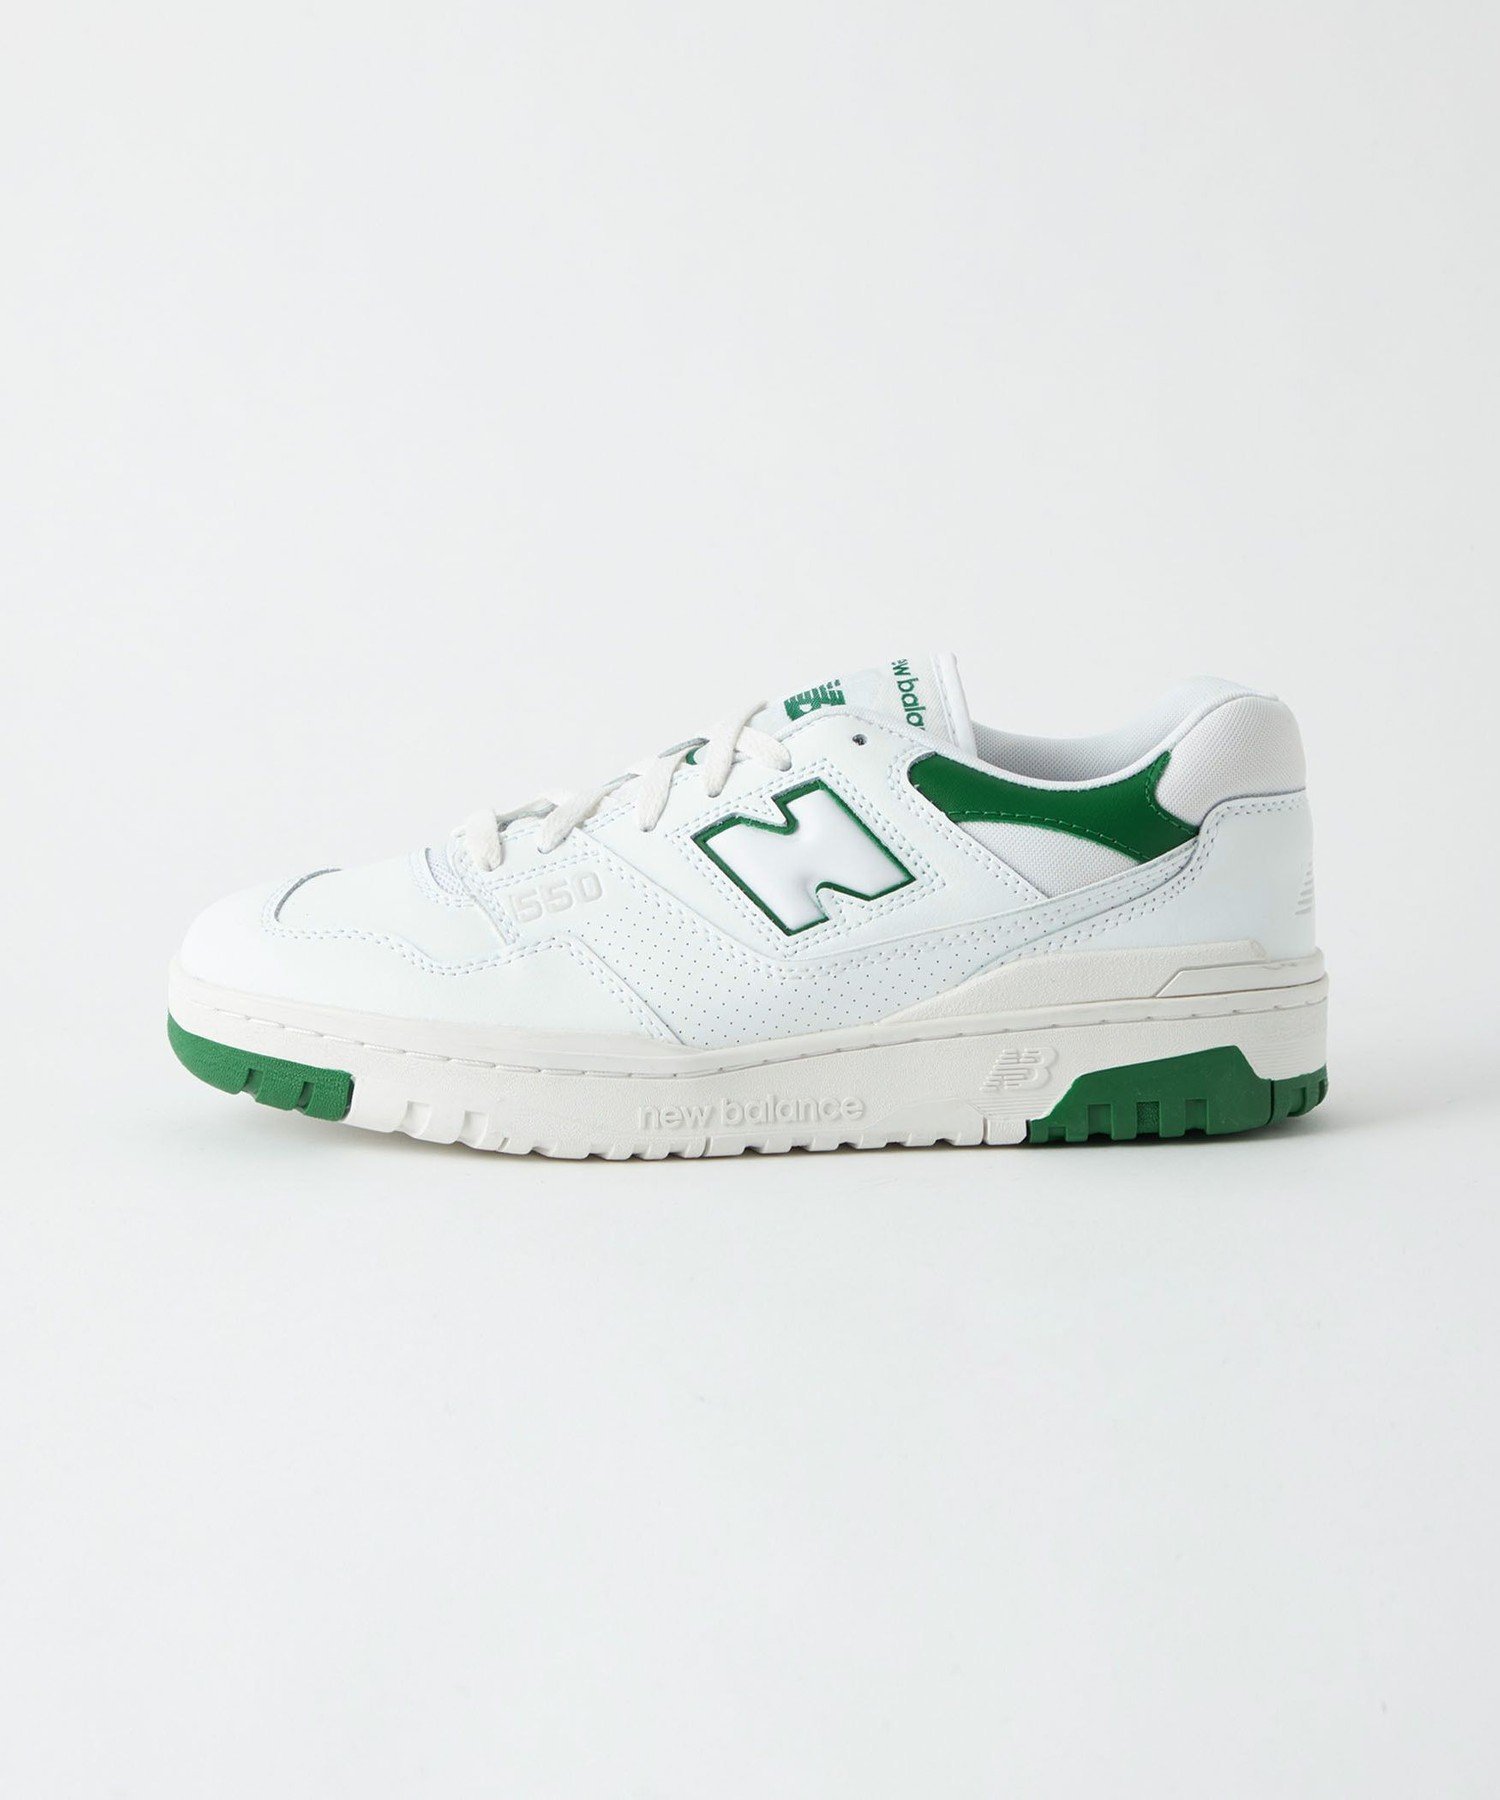 UNITED ARROWS green label relaxing｜<New Balance>BB550 SWA/SWB